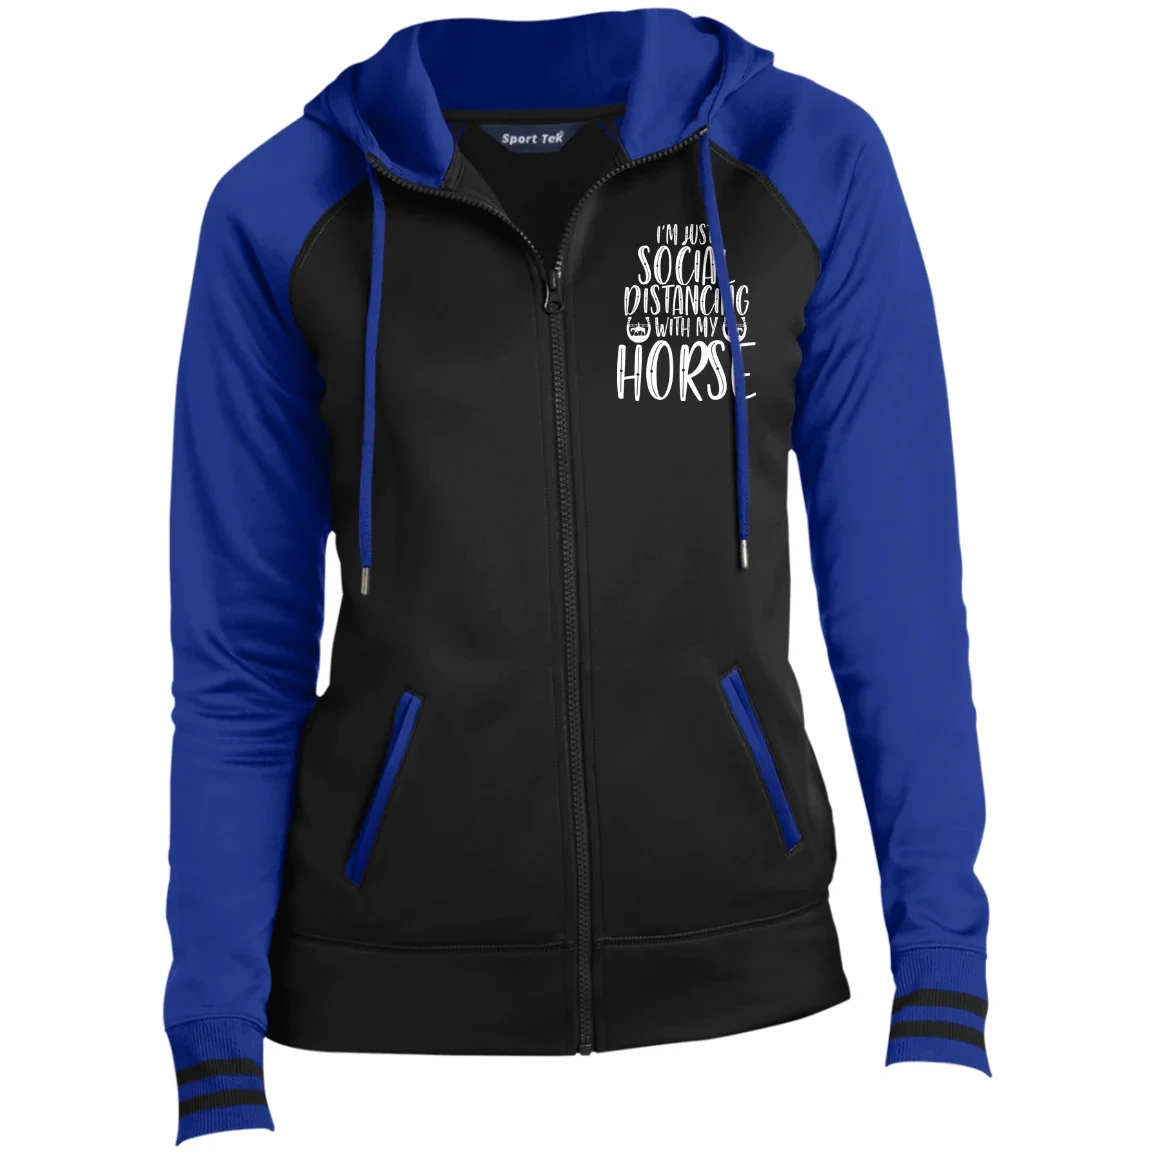 Mens Graphic Hoodies - Bangladesh Factory, Suppliers, Manufacturers